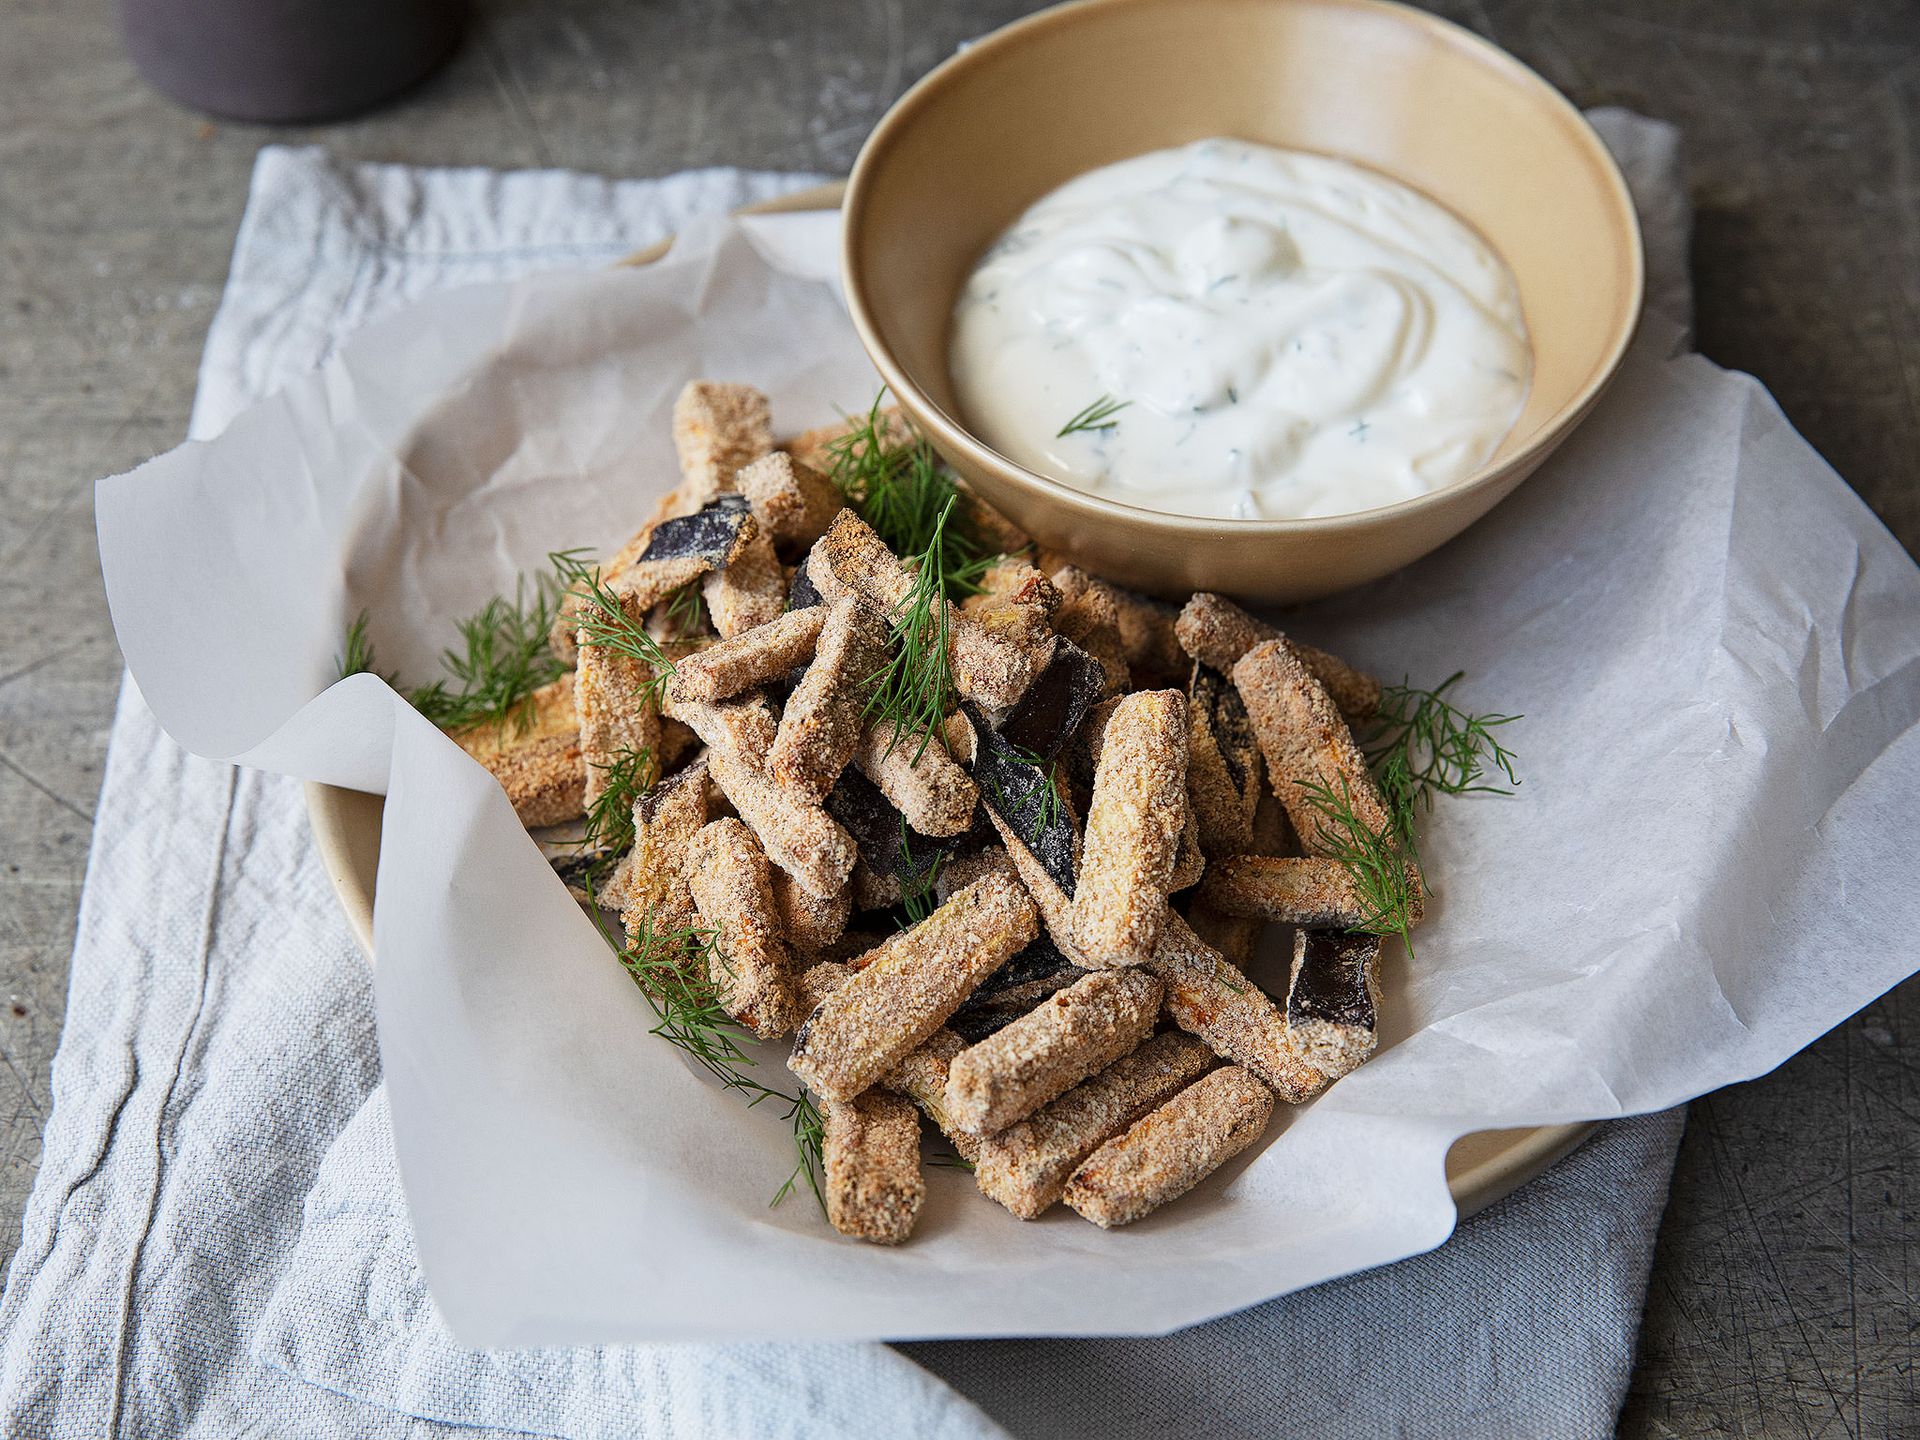 Eggplant fries with limey dill dip